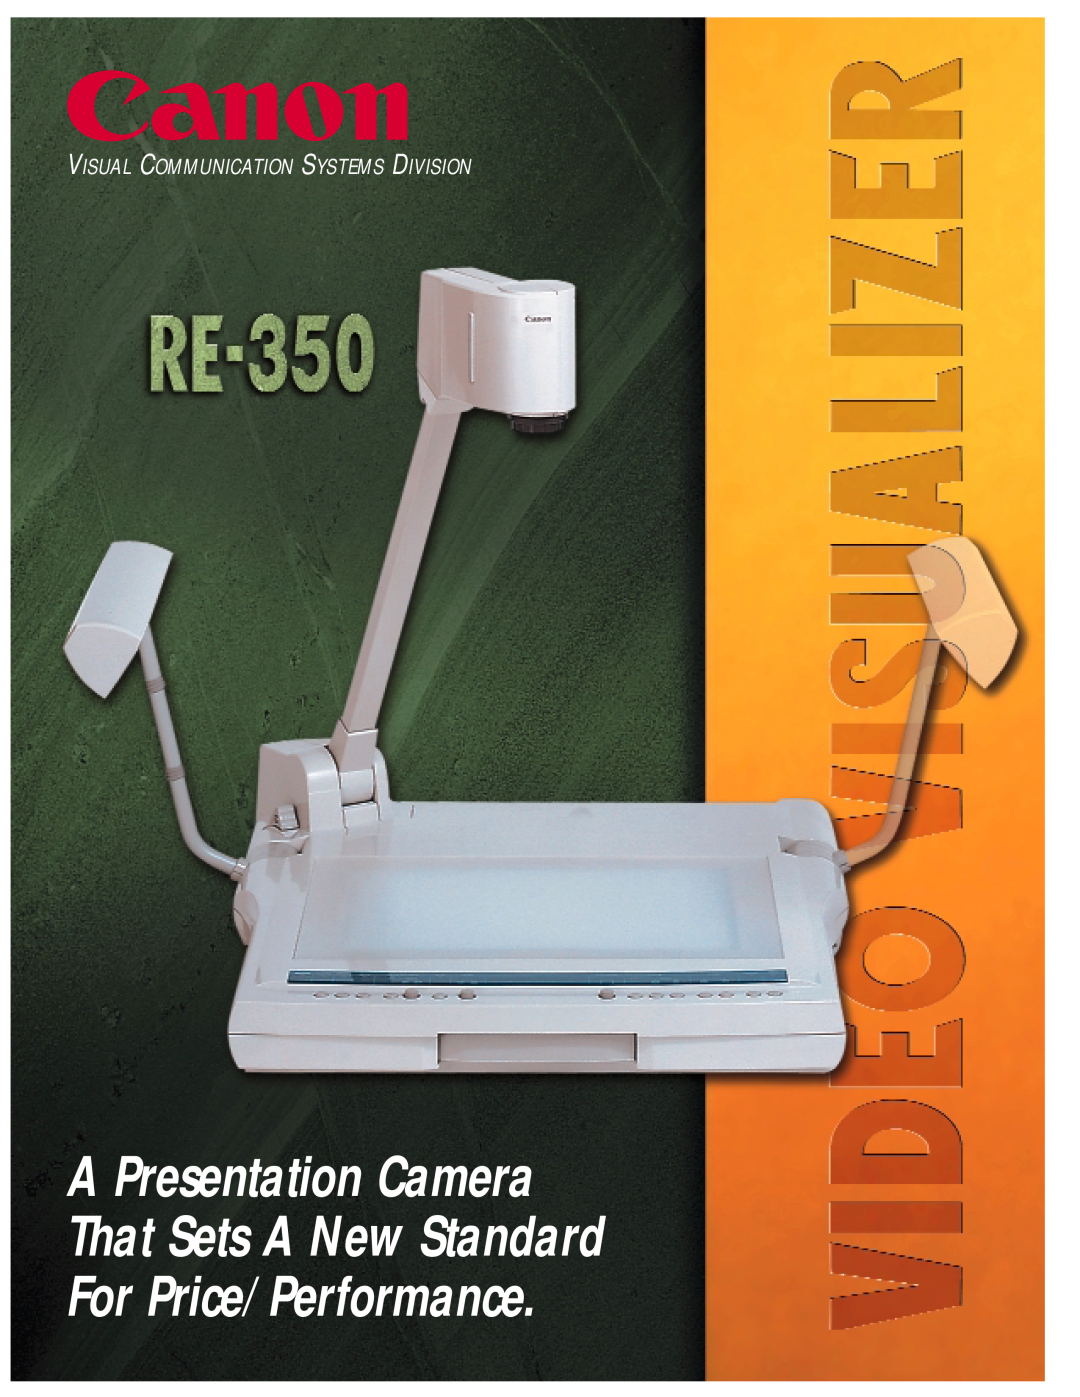 Canon RE-350 manual A Presentation Camera That Sets A New Standard For Price/Performance 